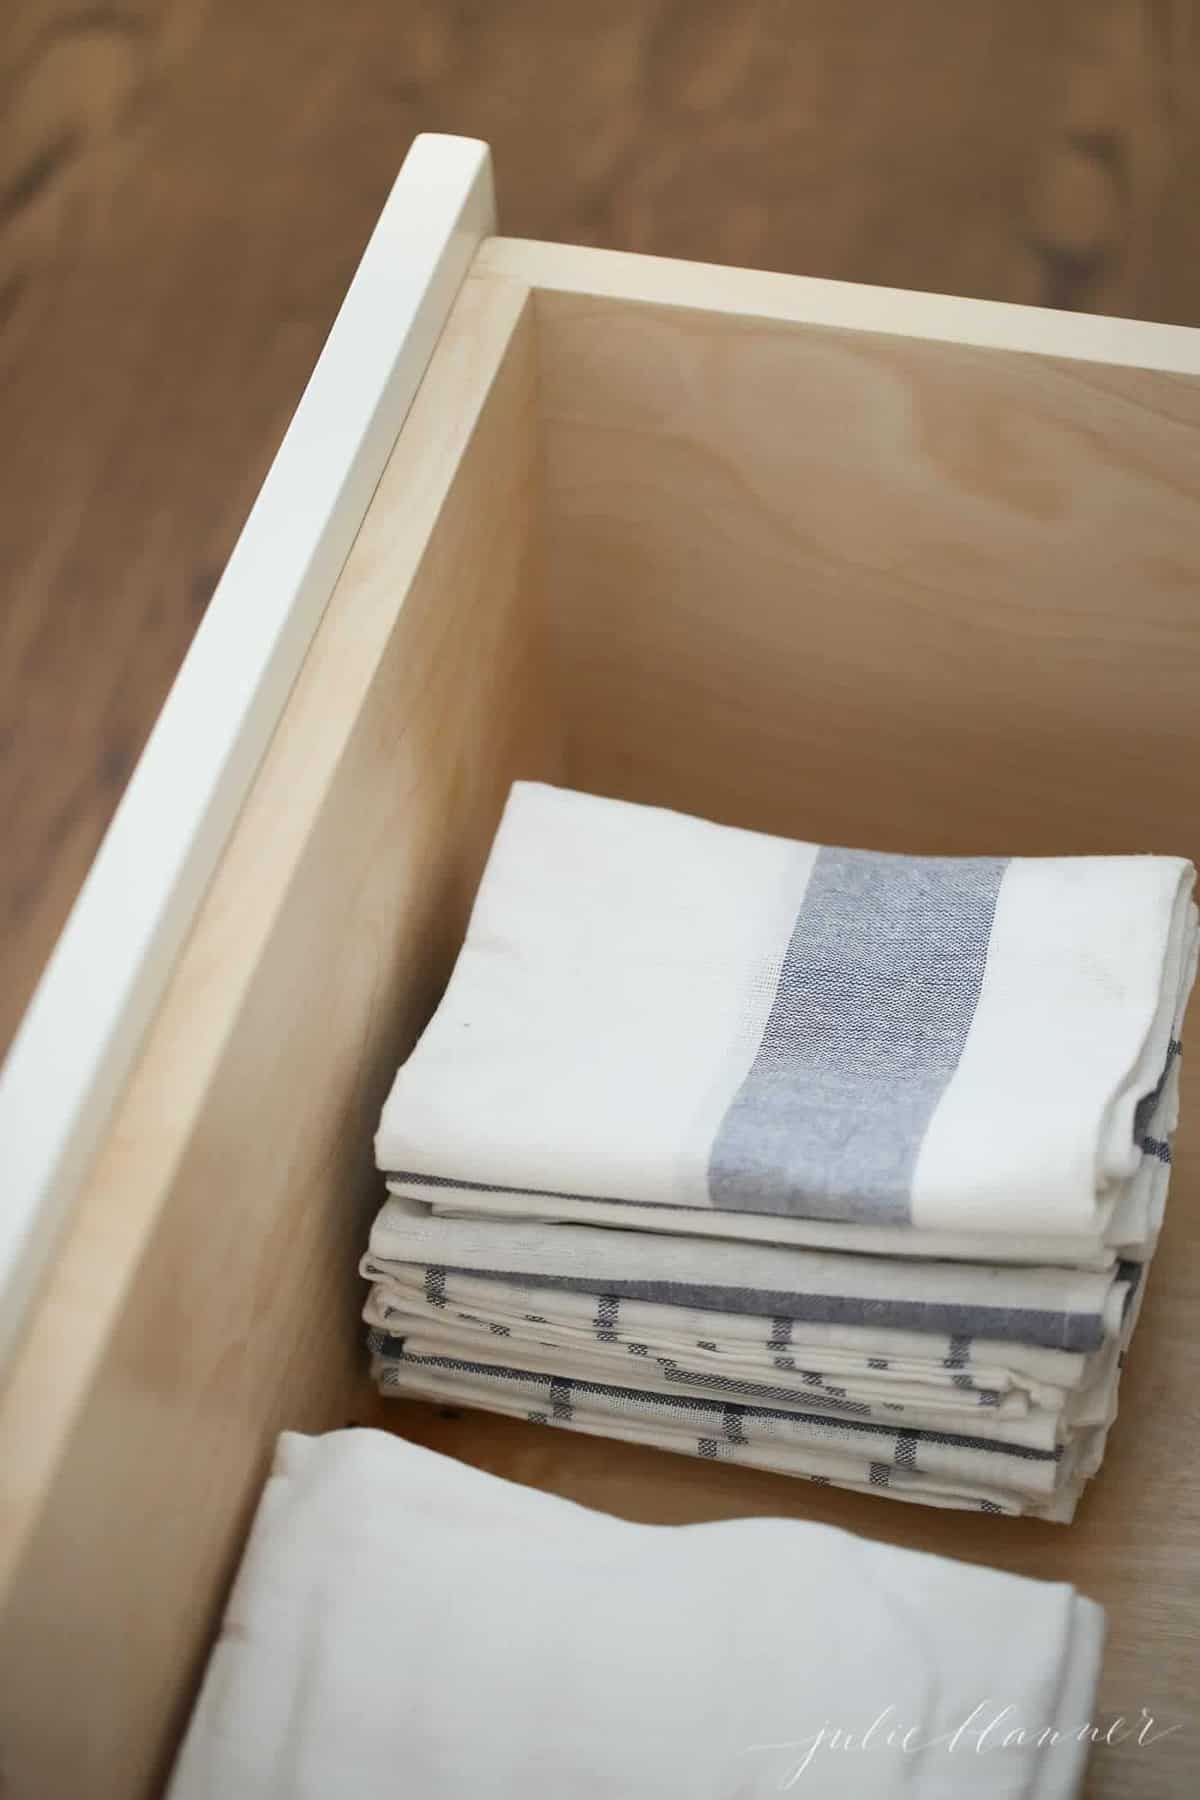 Blue and white striped simple kitchen towels inside a drawer.